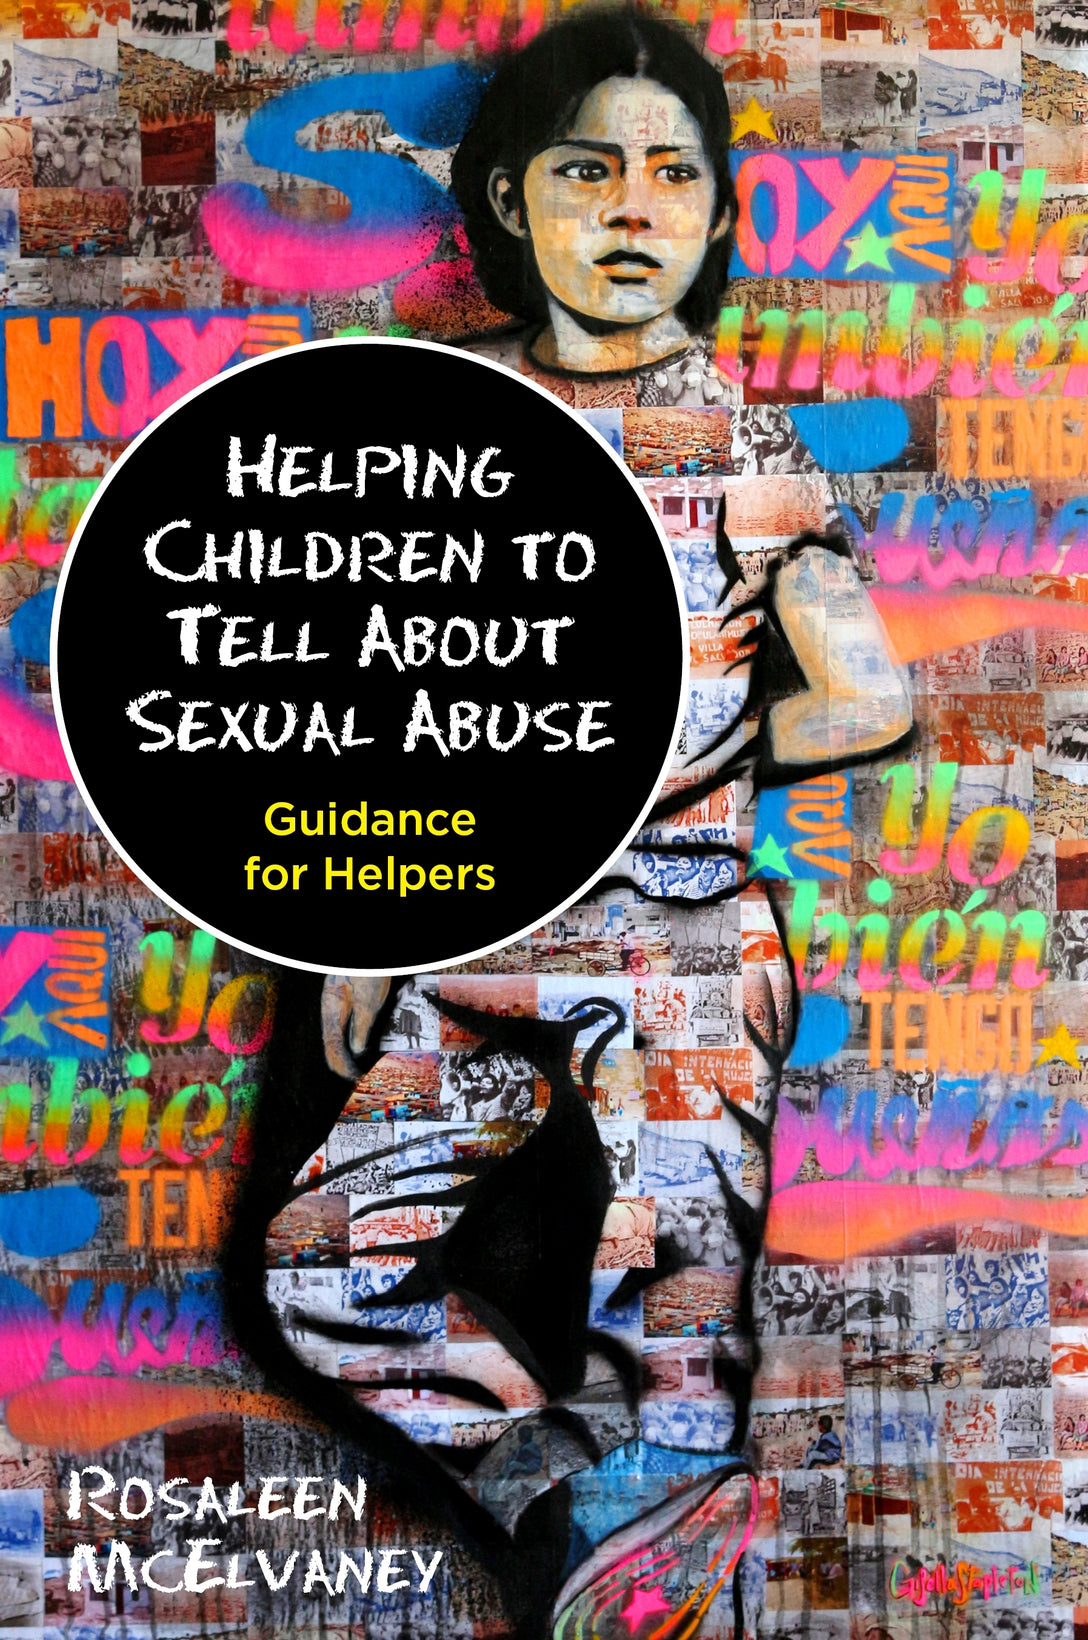 Helping Children to Tell About Sexual Abuse by Rosaleen McElvaney